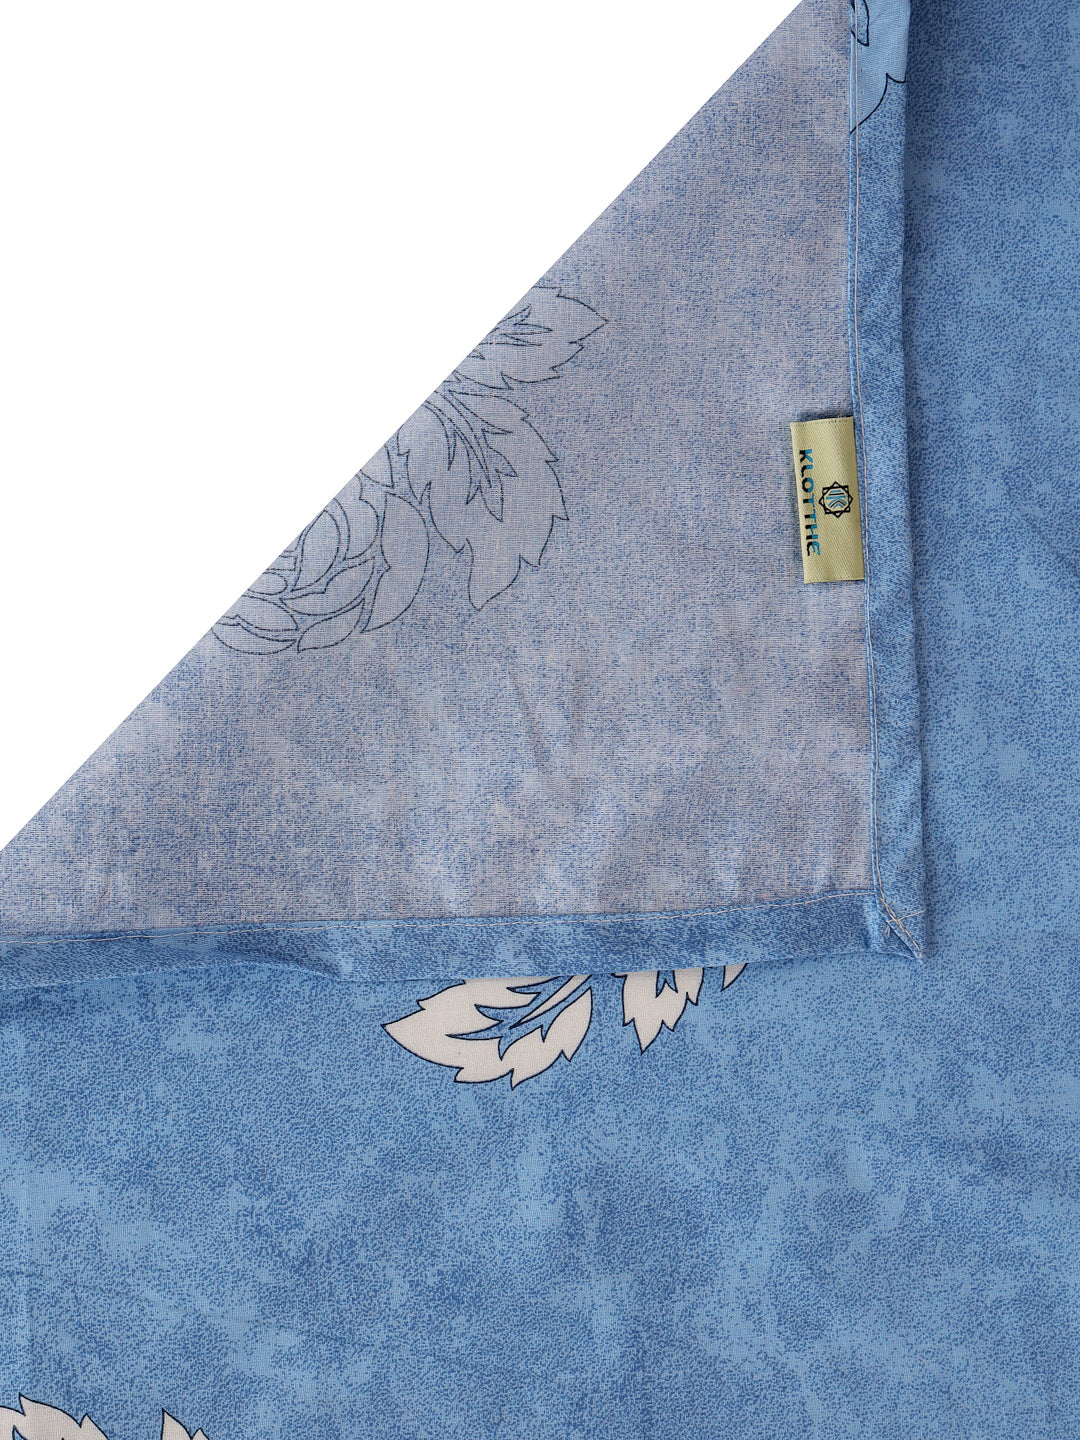 Klotthe Blue Floral 400 TC Pure Cotton Single Bedsheet Set in Book Fold Packing